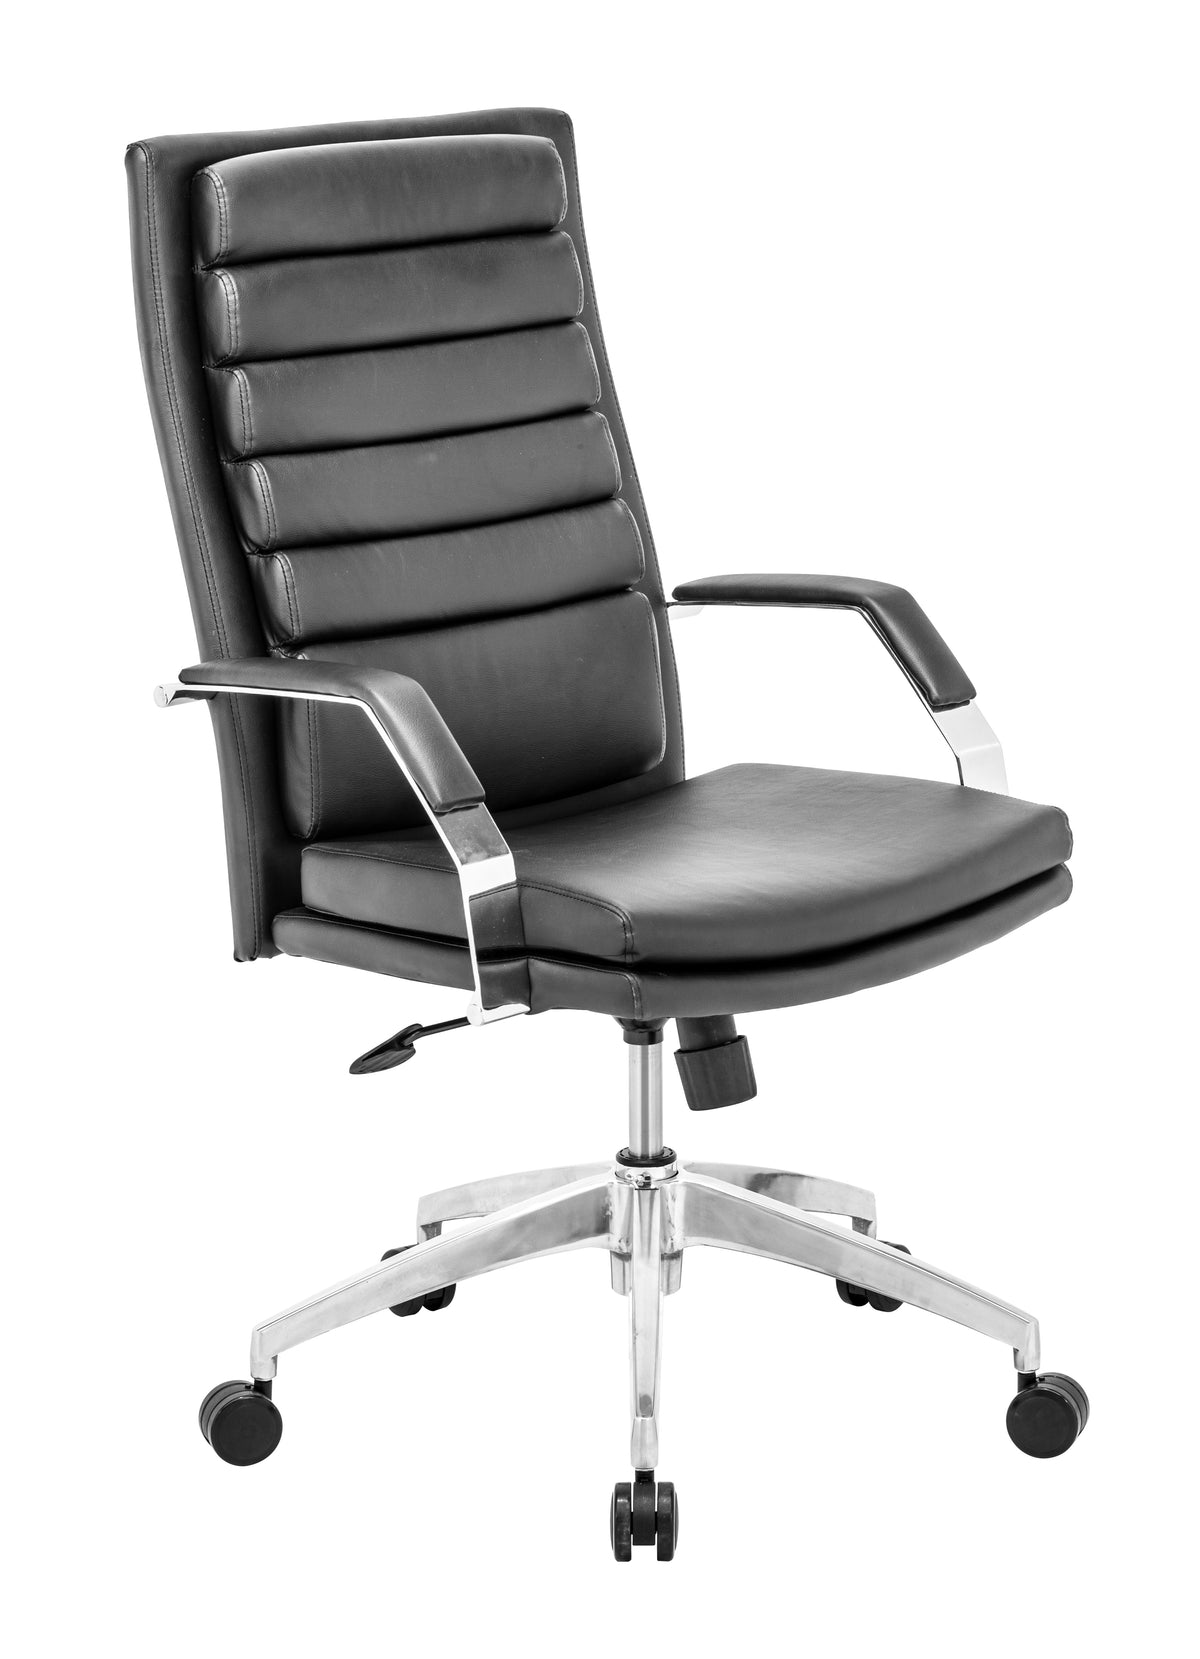 Director Comfort Office Chair Black - YuppyCollections